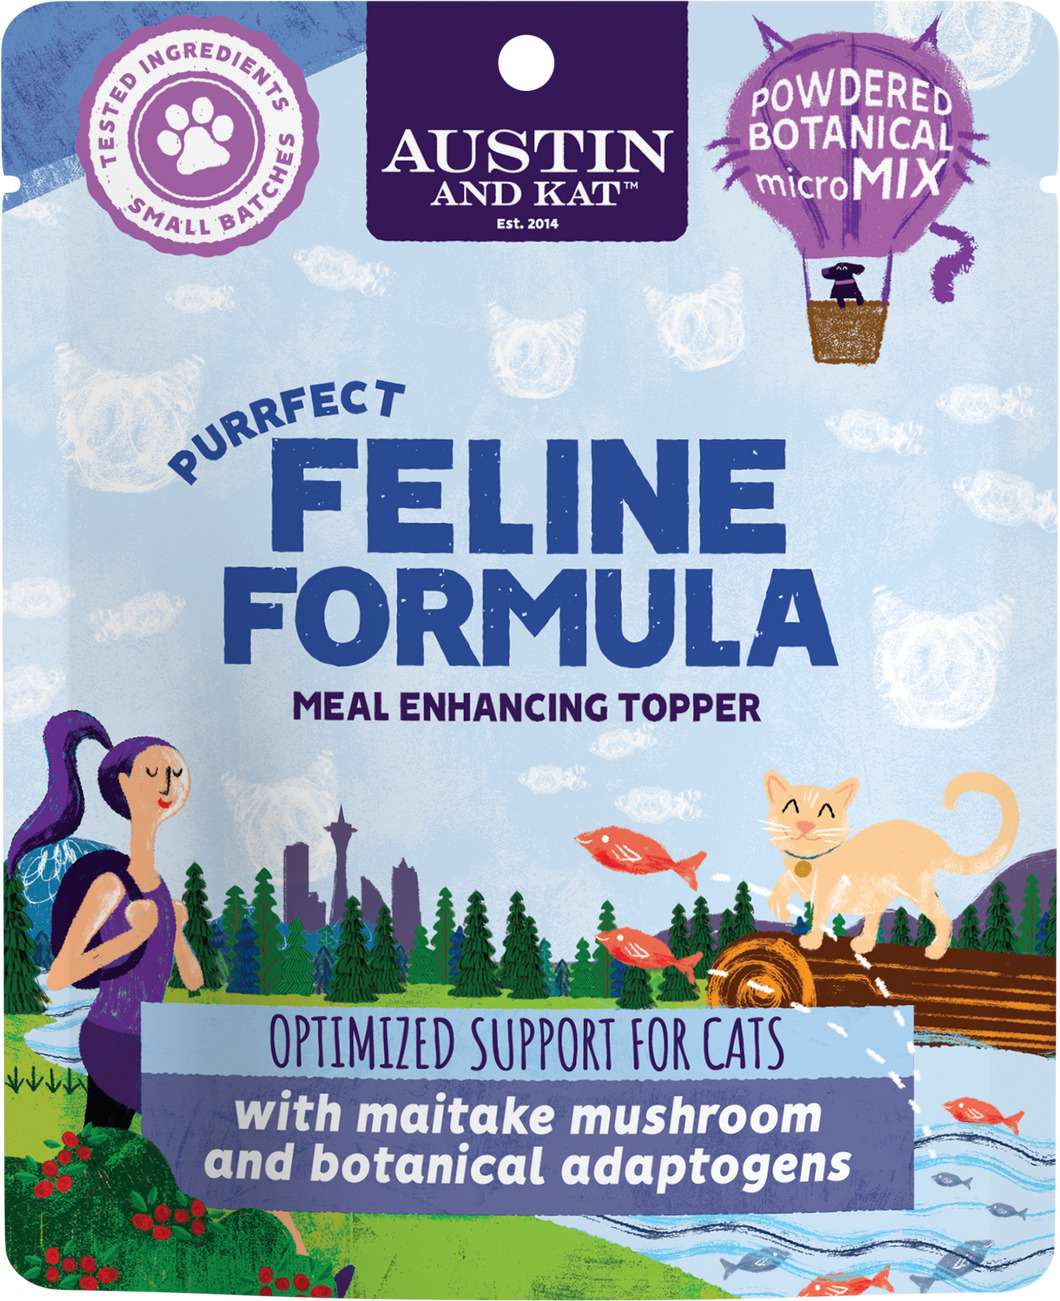 Austin and Kat Meal Enhancing Topper - Purrfect Feline Formula 66g Pouch